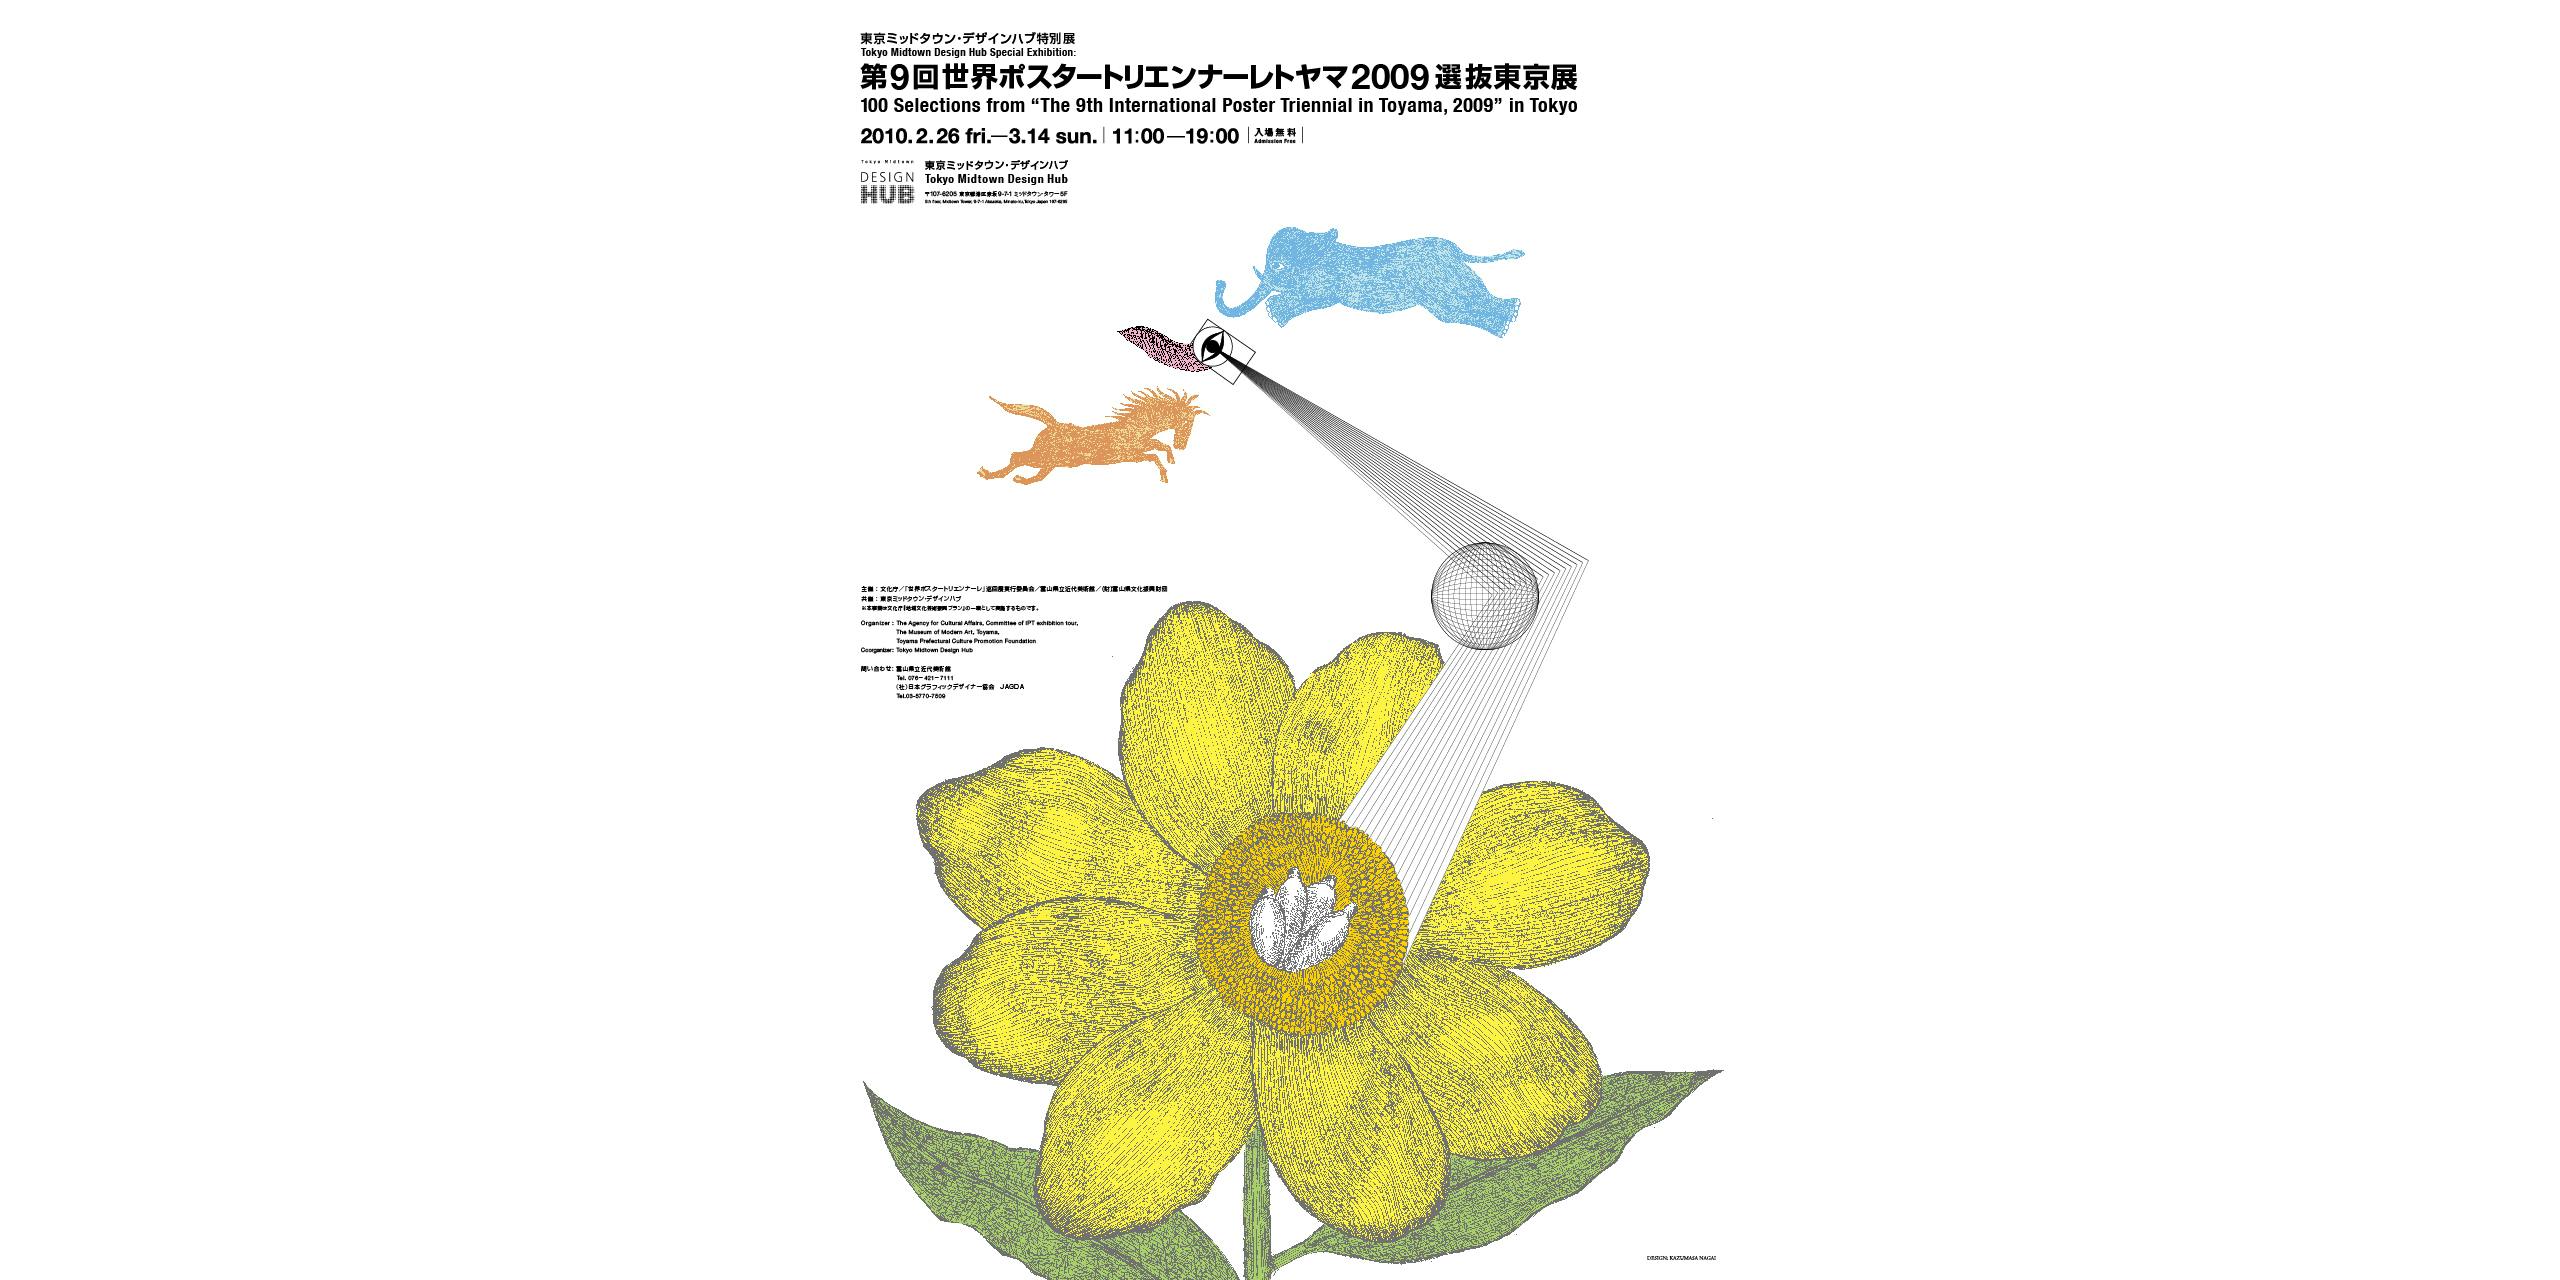 100 Selections from "The 9th International Poster Triennial in Toyama, 2009" in Tokyo